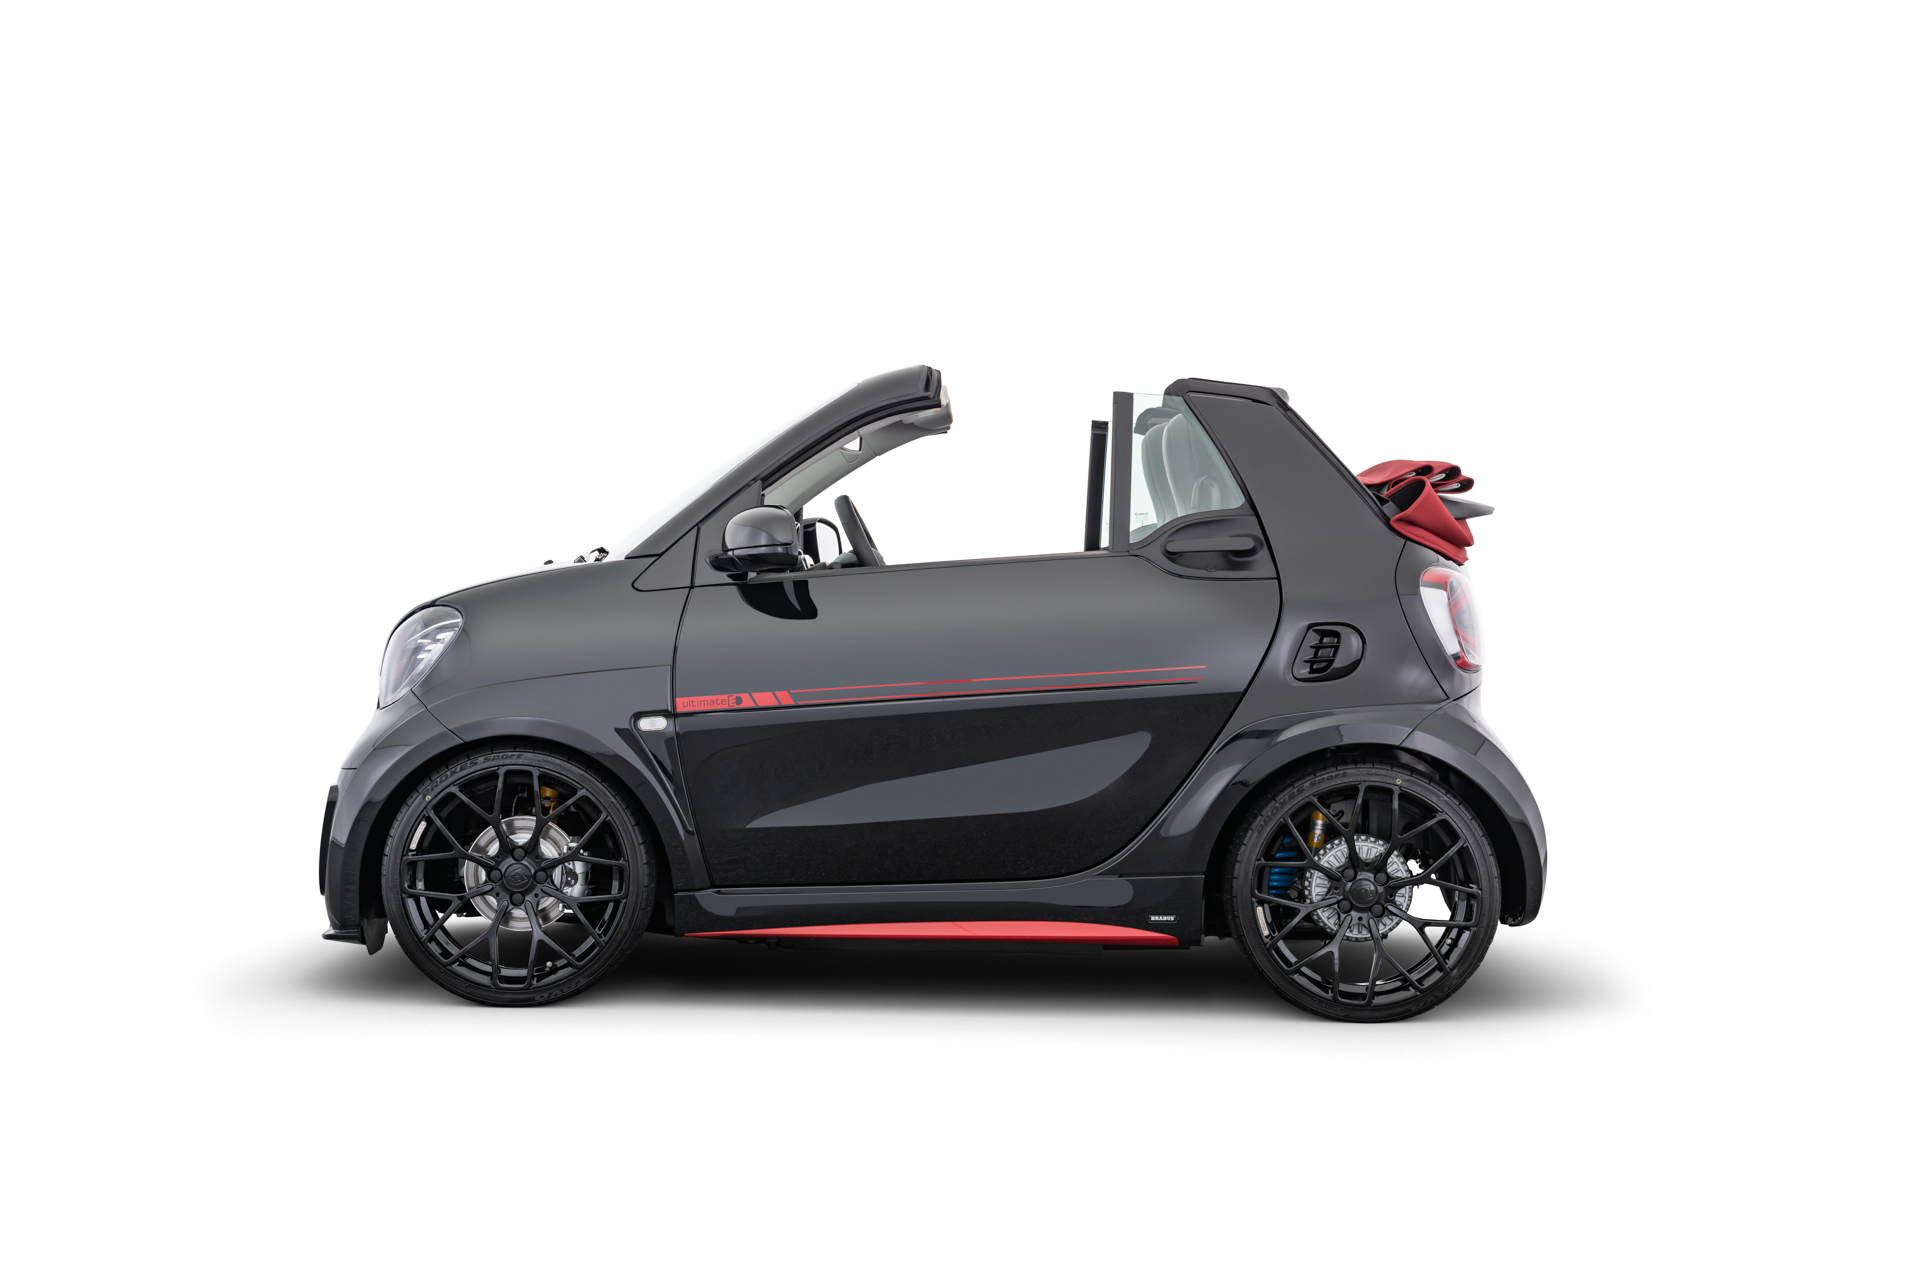 Smart car gets even smarter with Brabus sport package